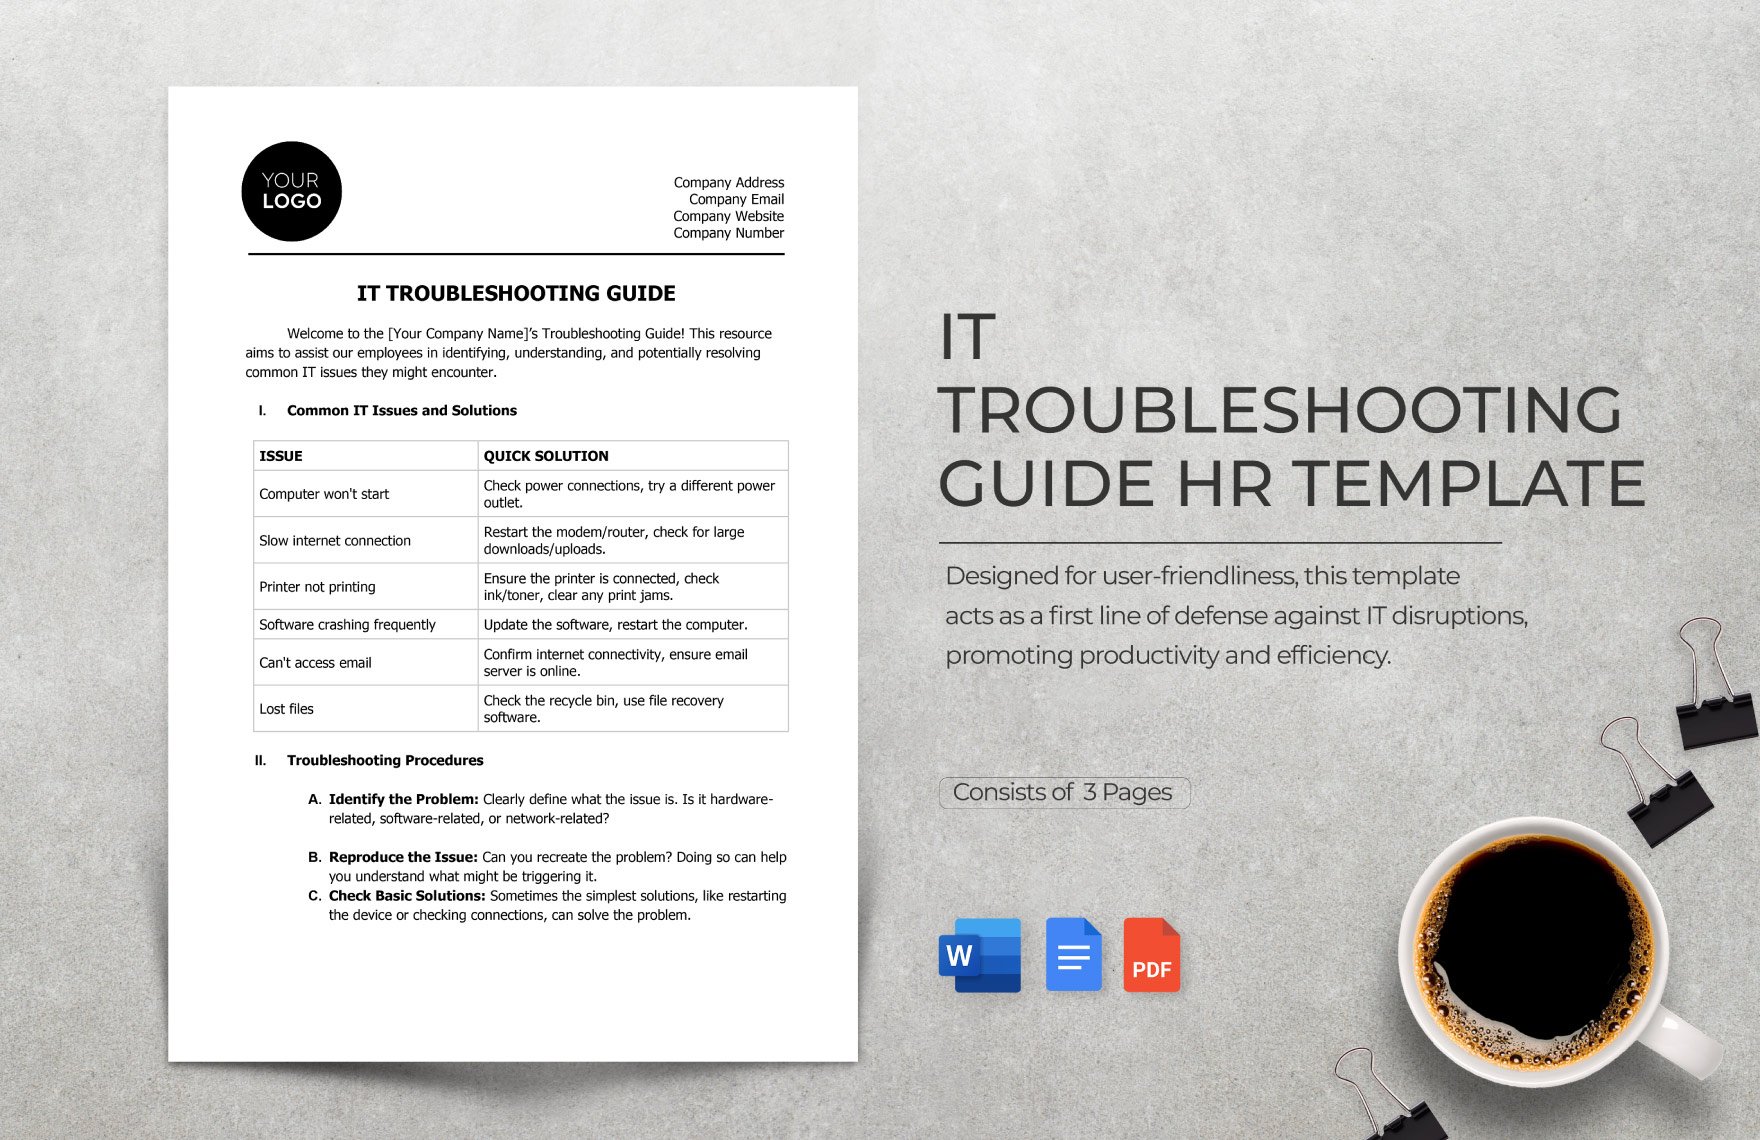 IT Troubleshooting Guide HR Template in Word, Google Docs, PDF